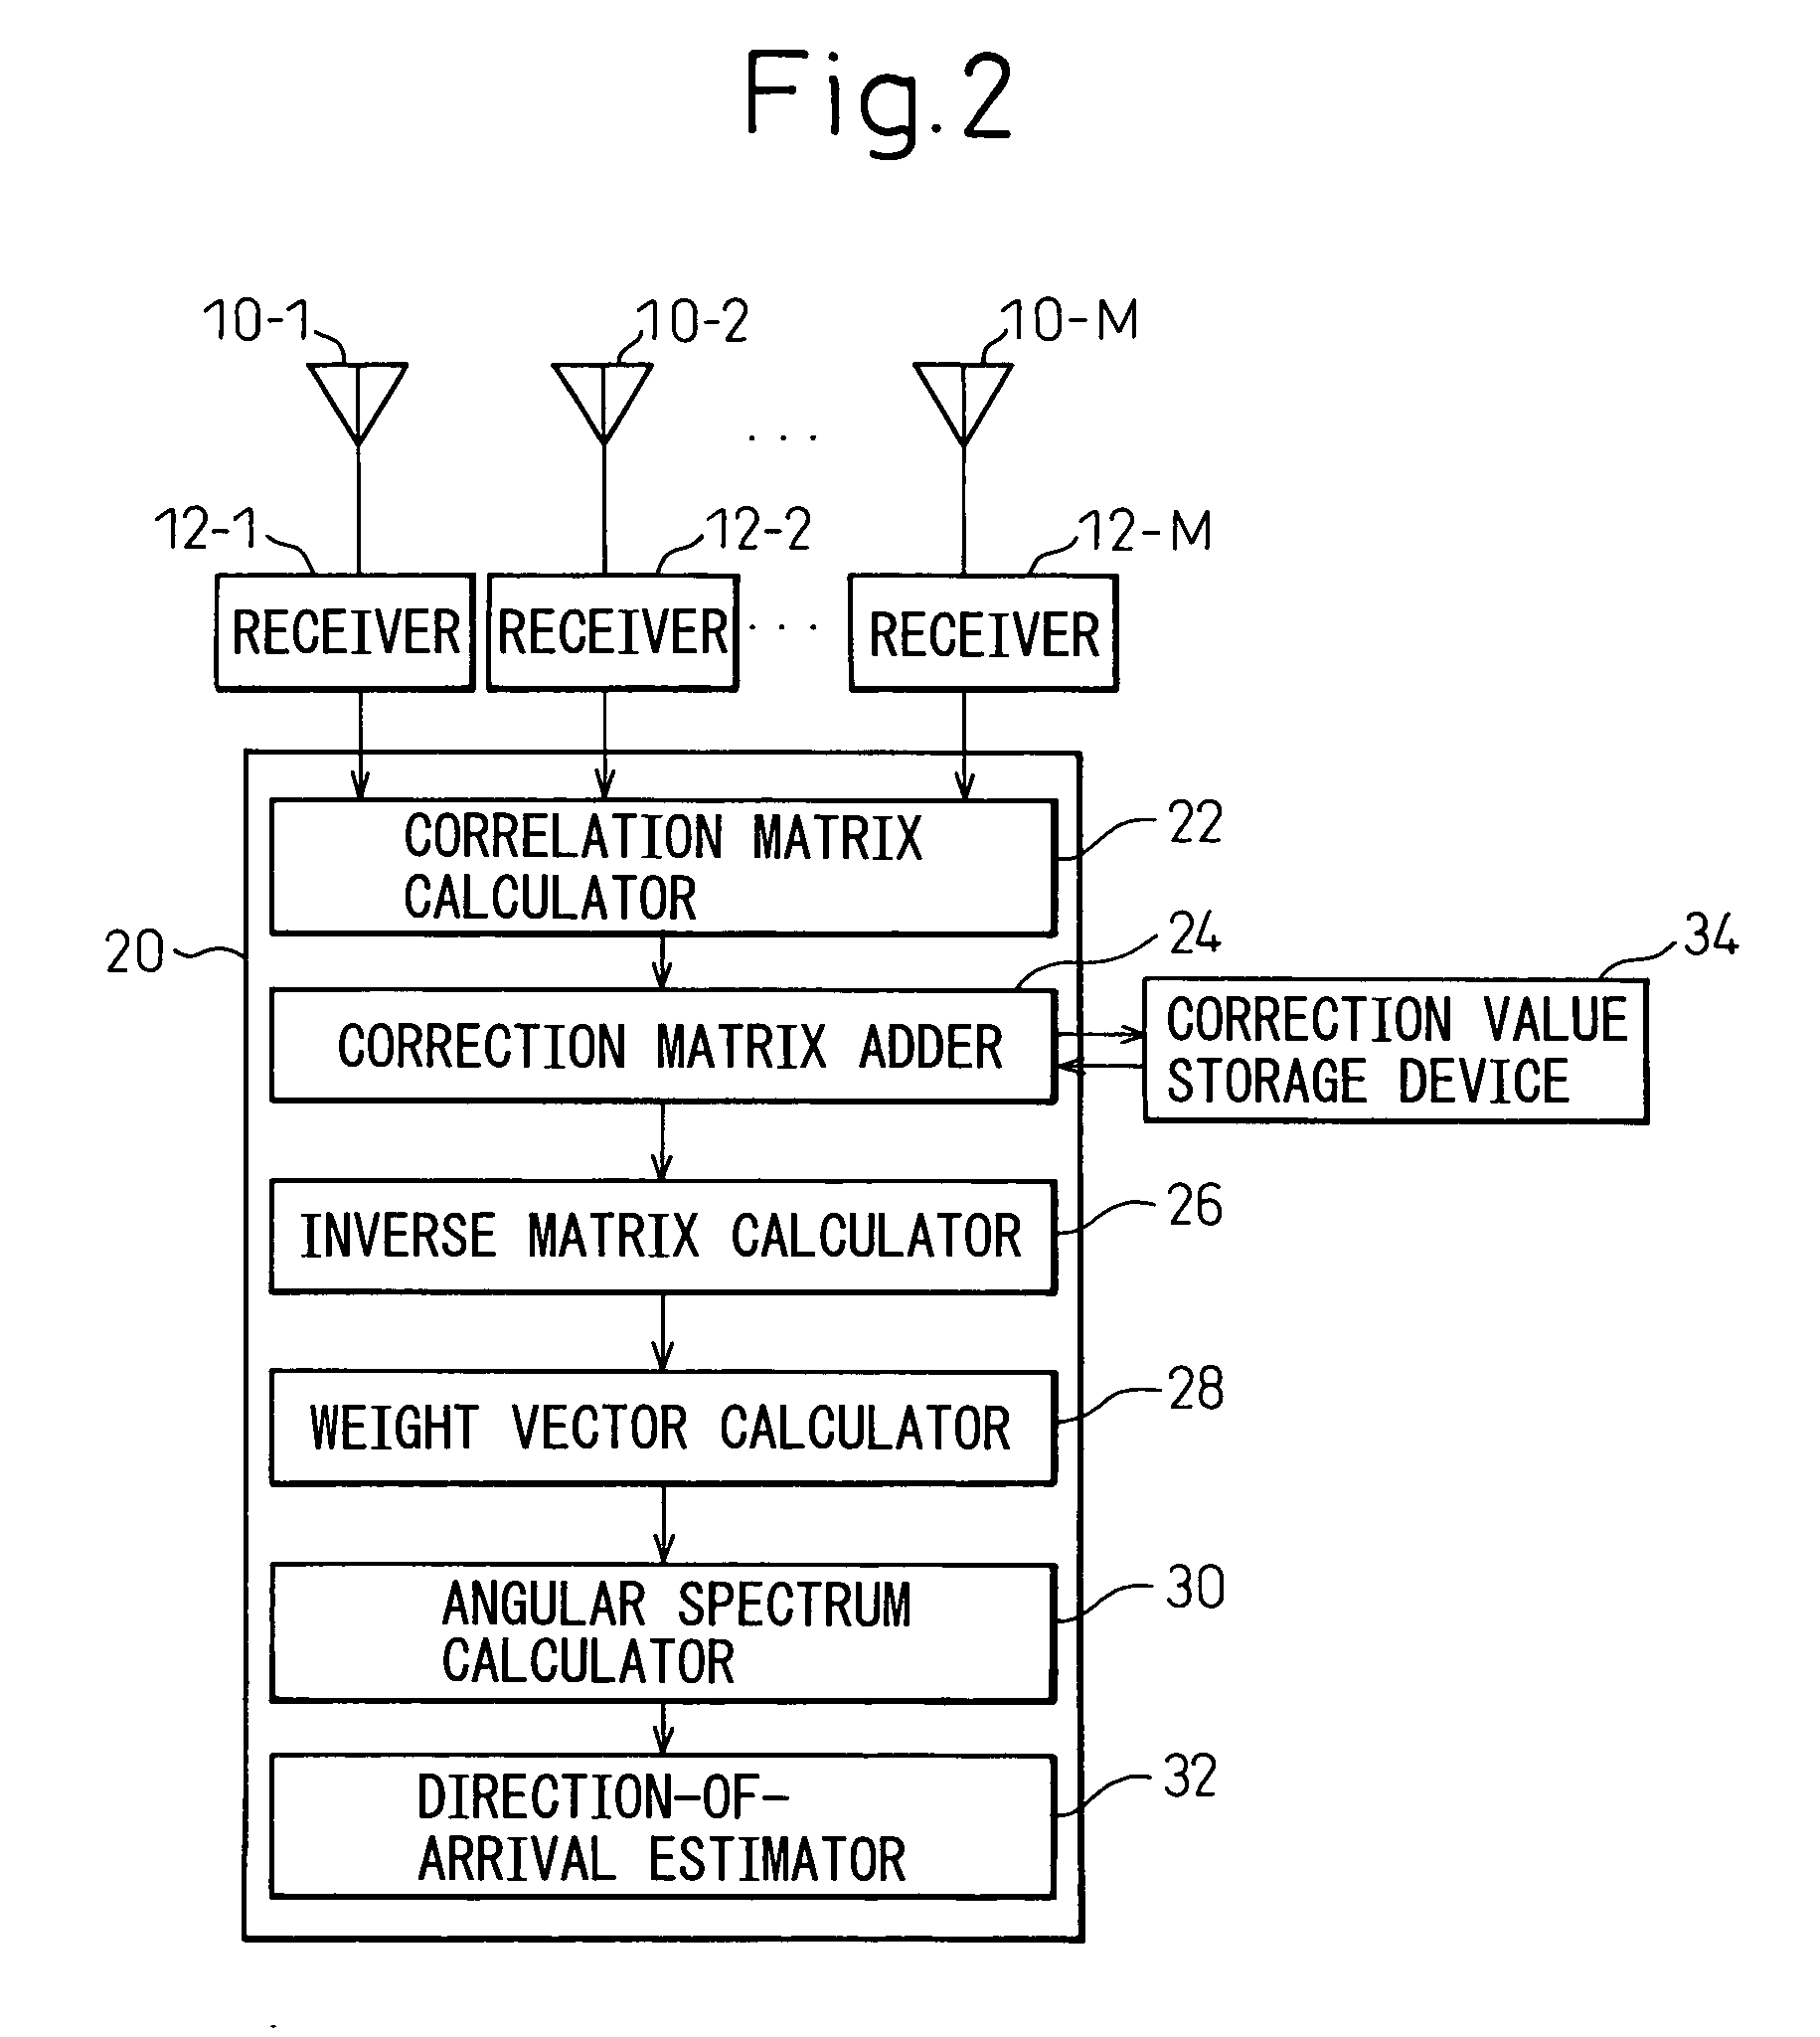 Apparatus and method for estimating direction of arrival of radio wave